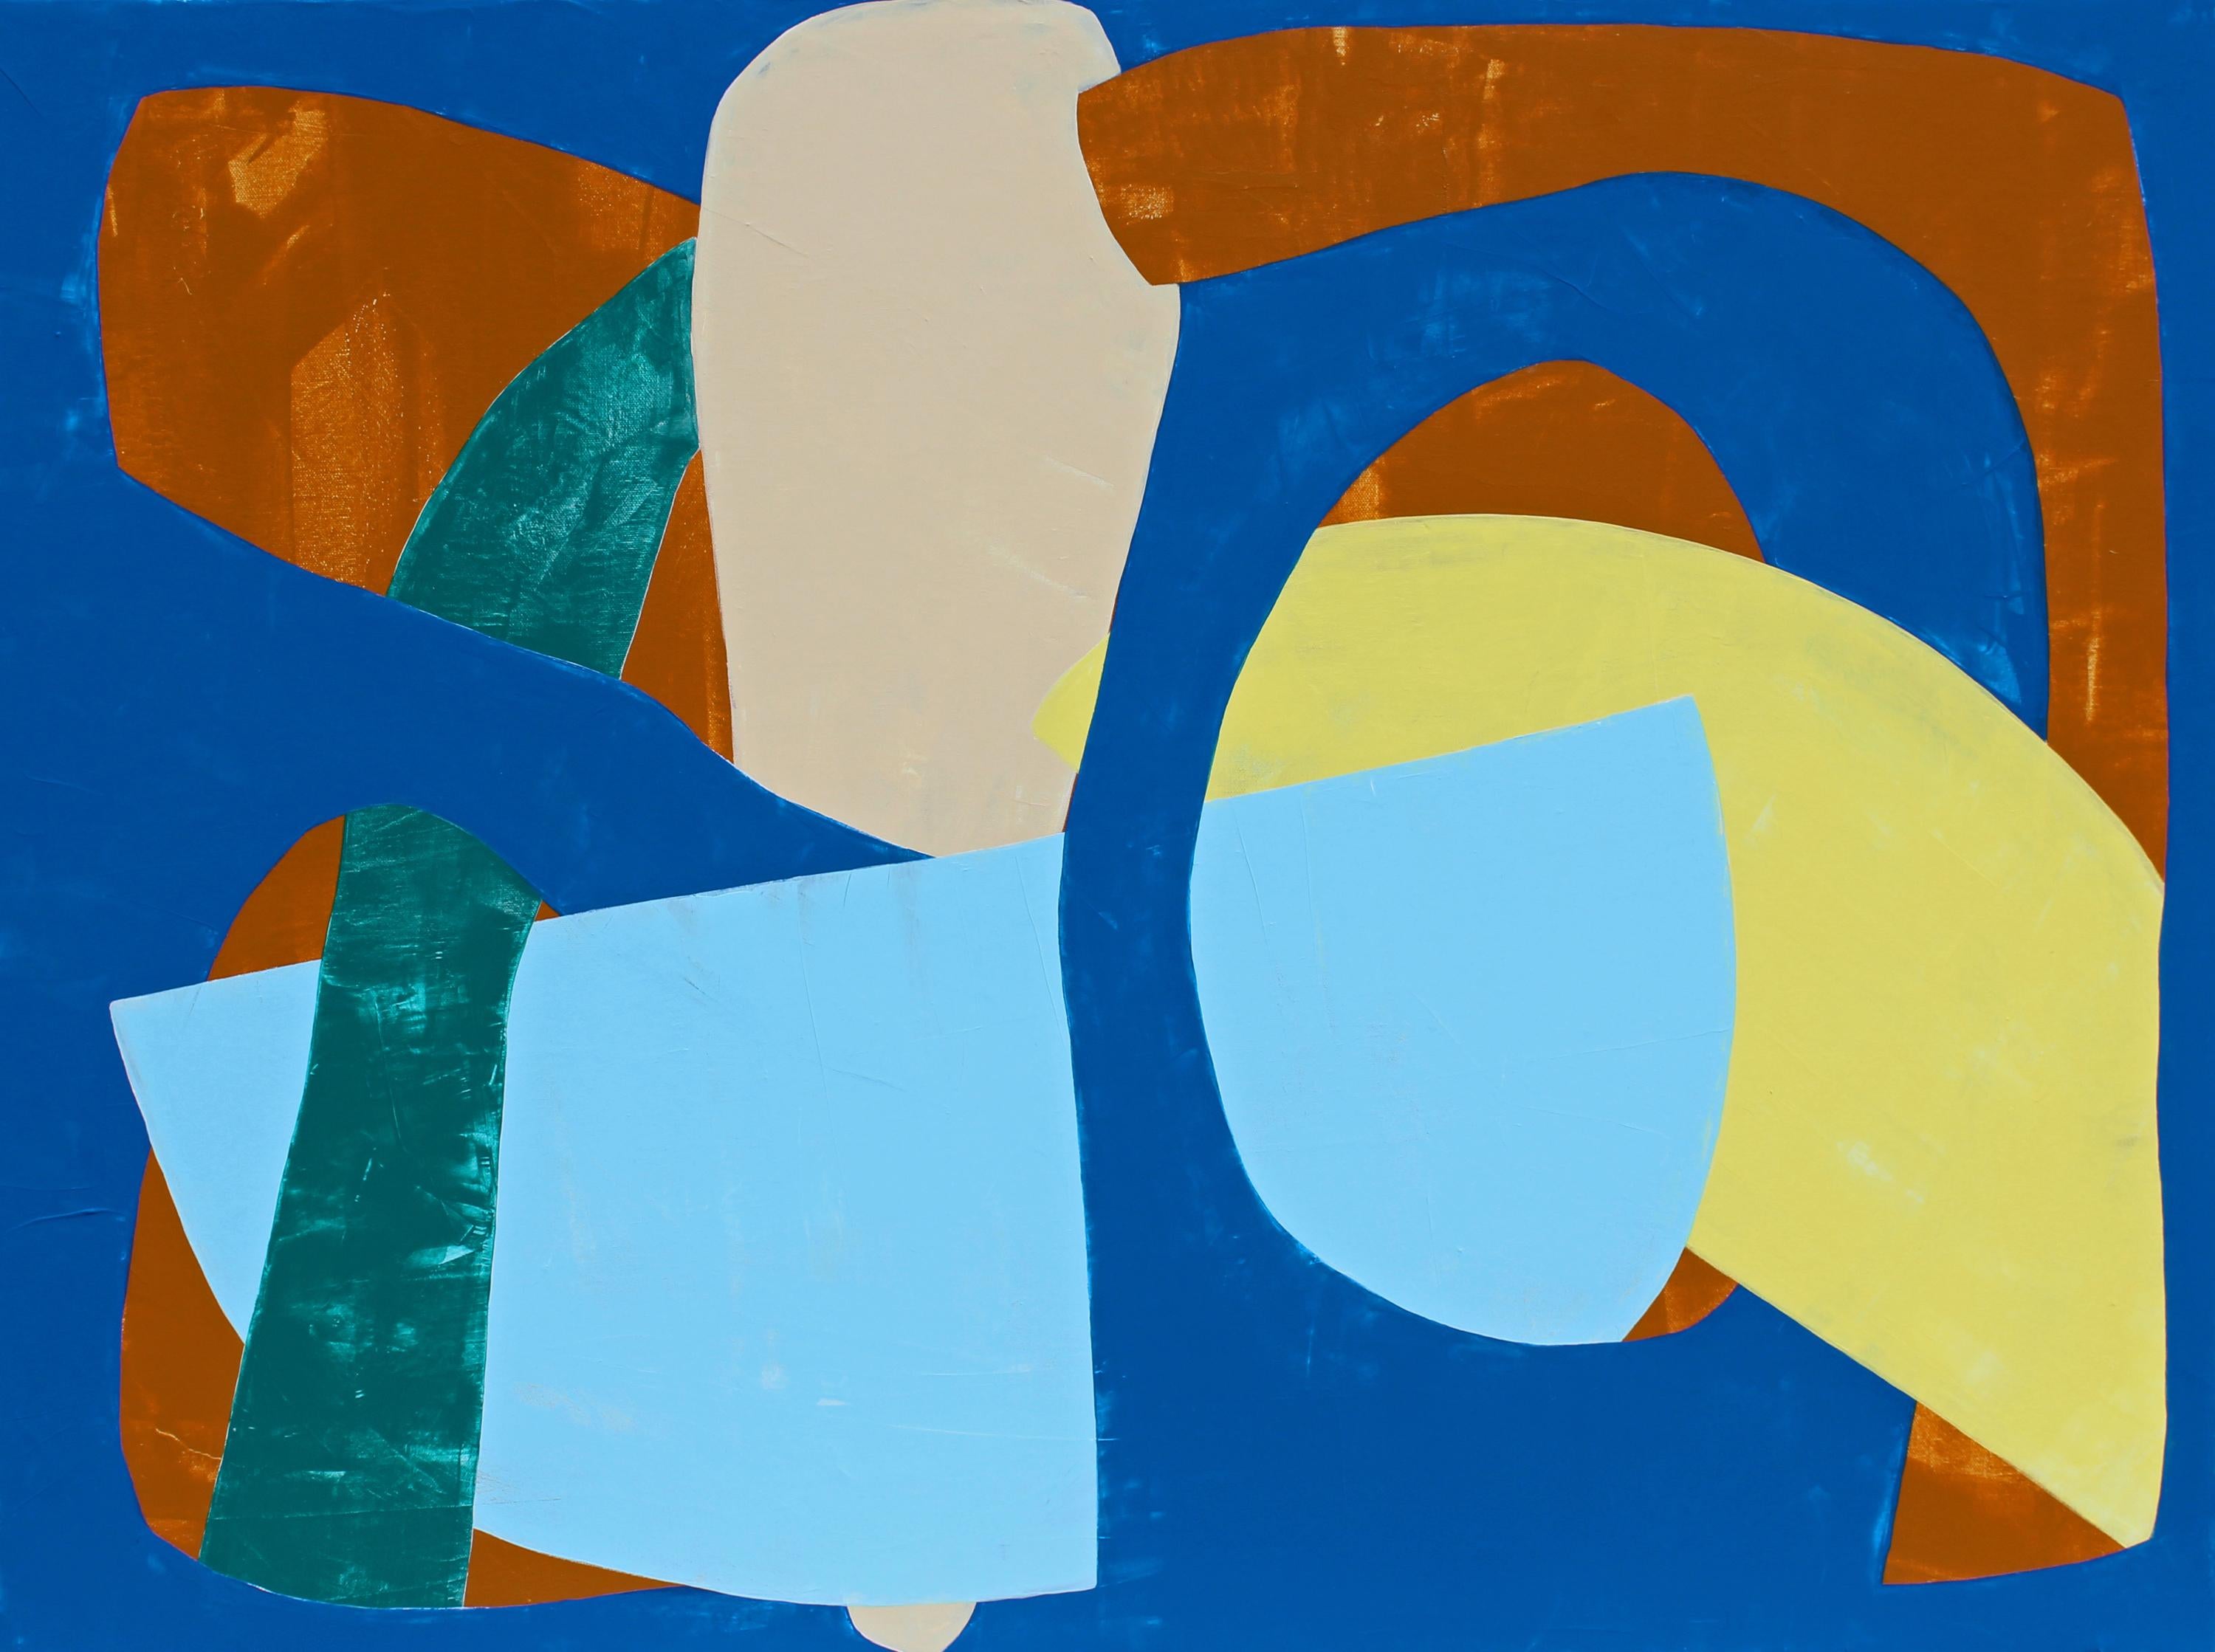 Laura Dargan Abstract Painting - "Rooted" - Colorful Non-Objective Painting - Bold Shapes - Sonia Delaunay